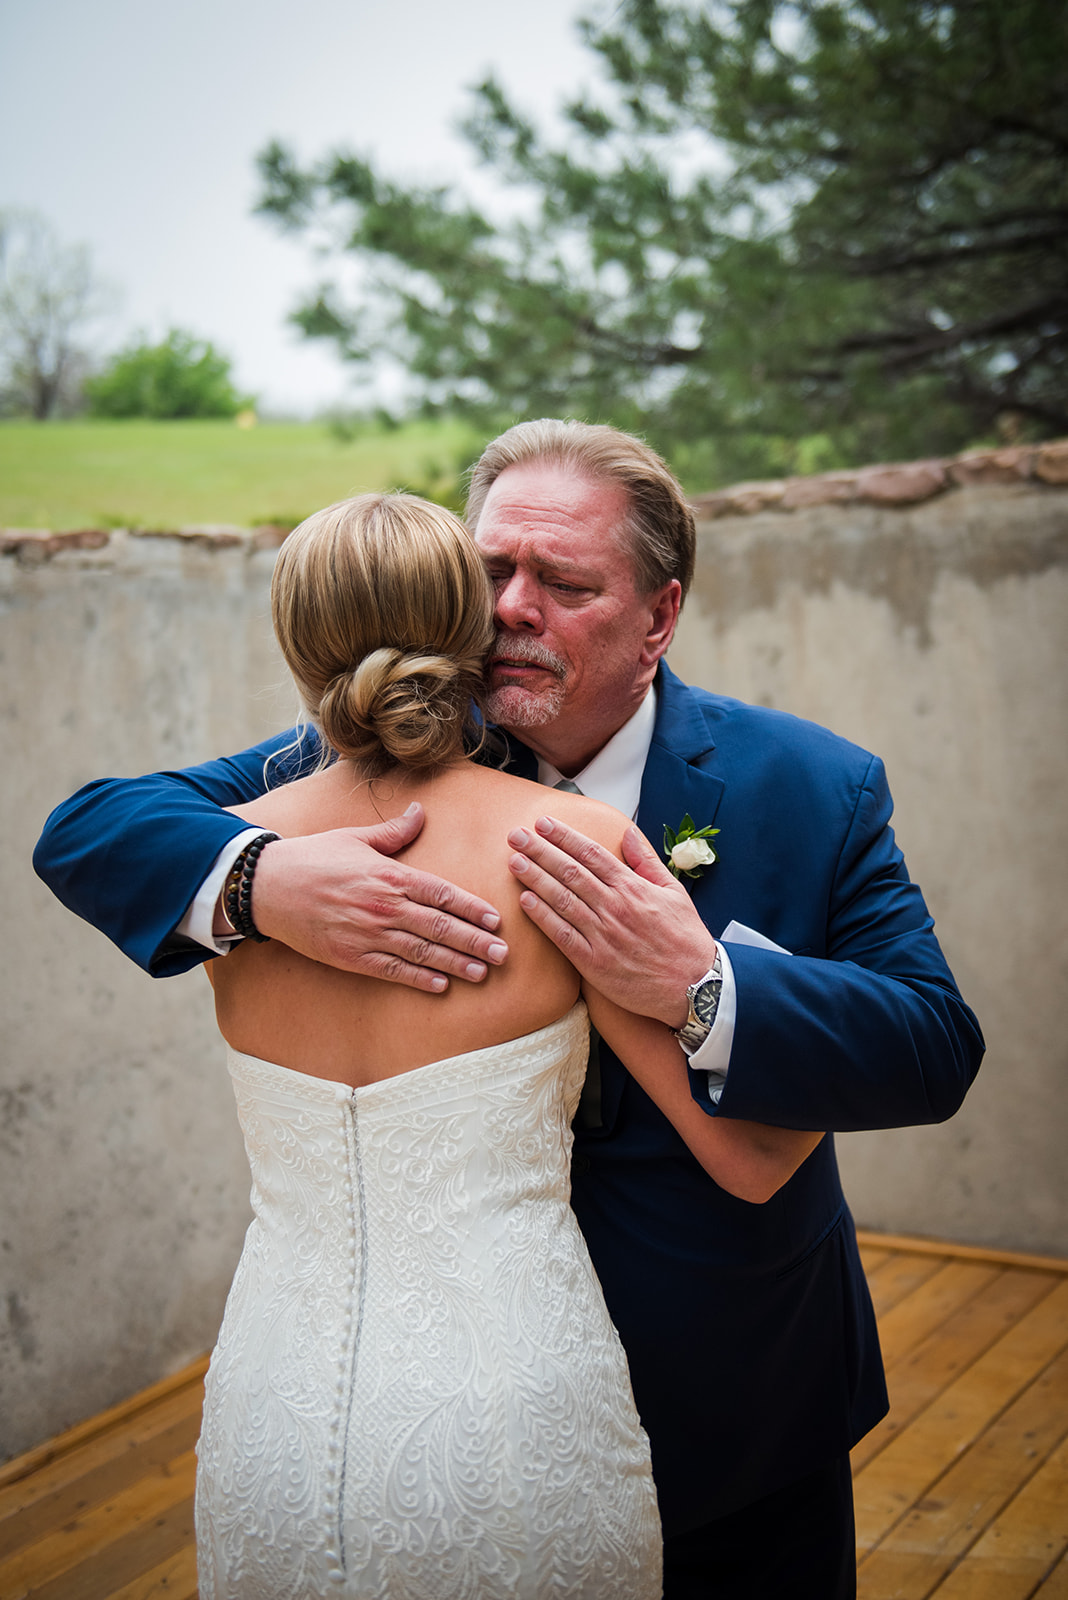 Bride's father hugs her emotionally after seeing her for the first time in her wedding dress.